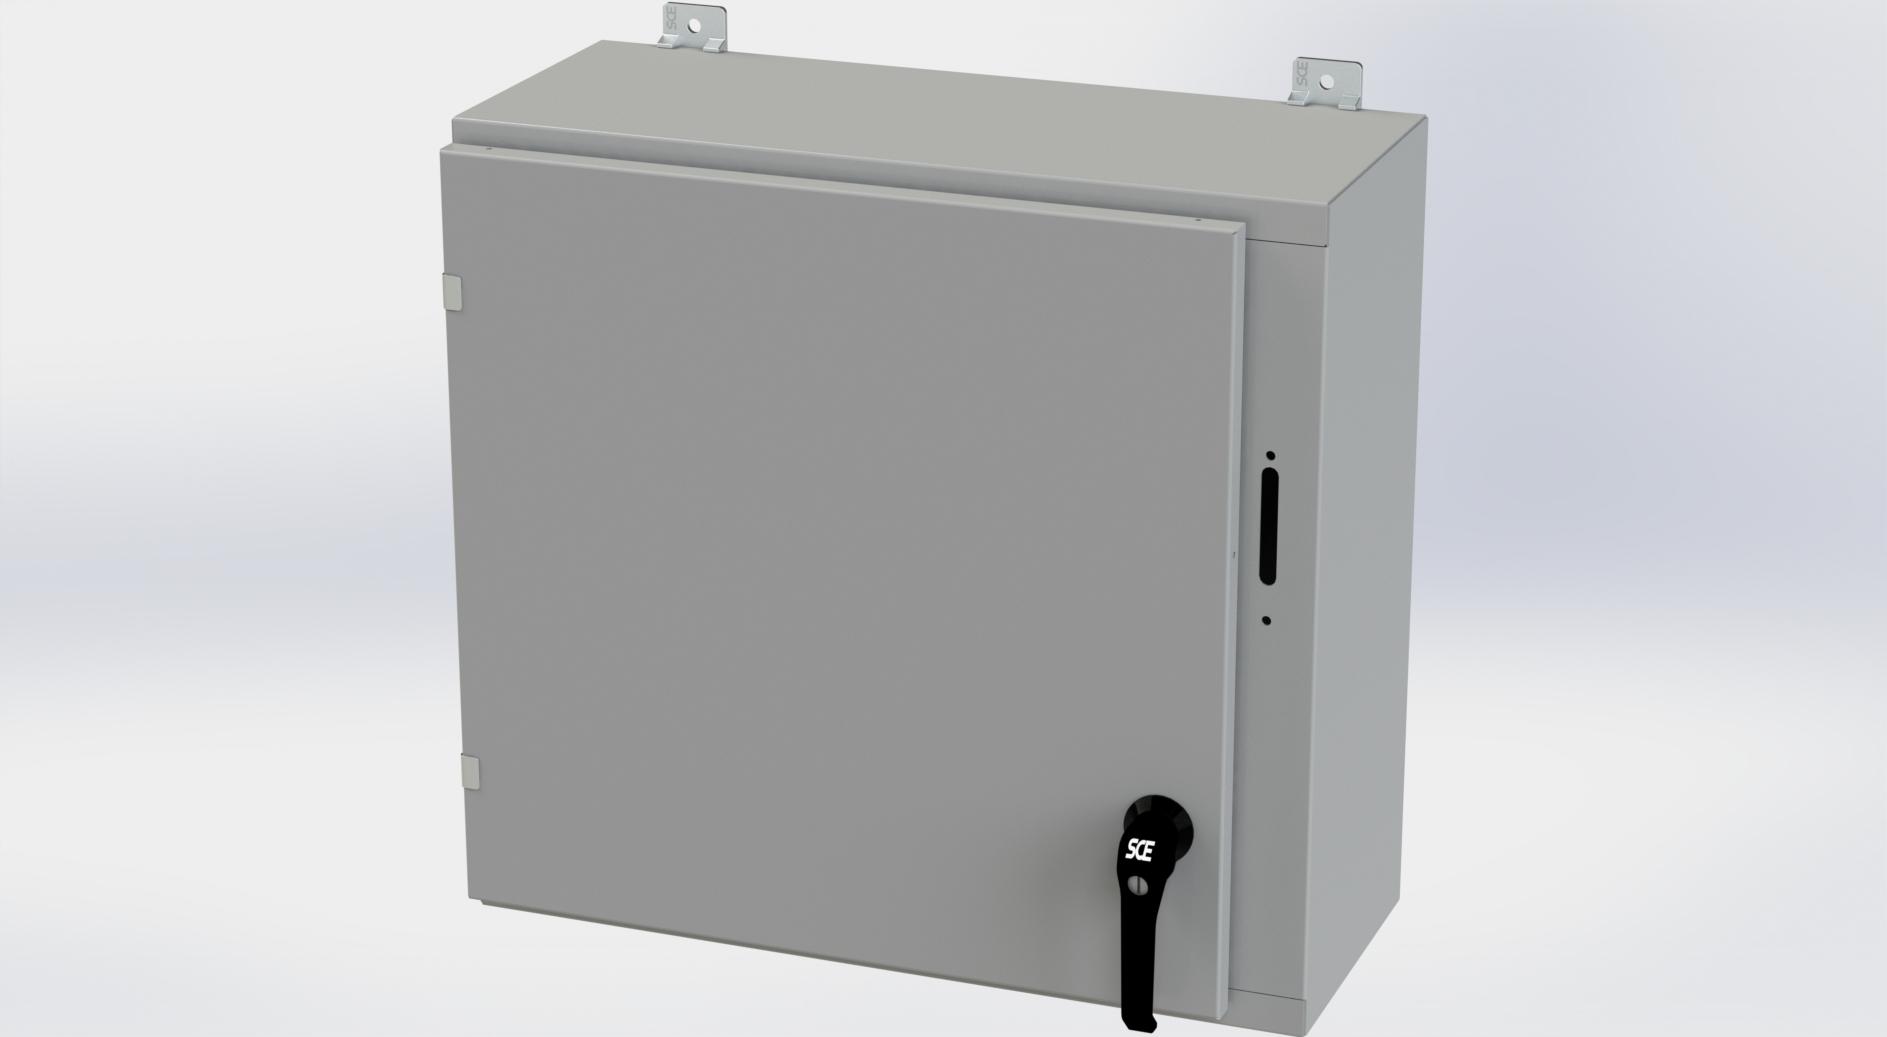 Saginaw Control SCE-24SA2610LPPL Obselete Use SCE-24XEL2510LP, Height:24.00", Width:25.38", Depth:10.00", ANSI-61 gray powder coating inside and out. Optional sub-panels are powder coated white.